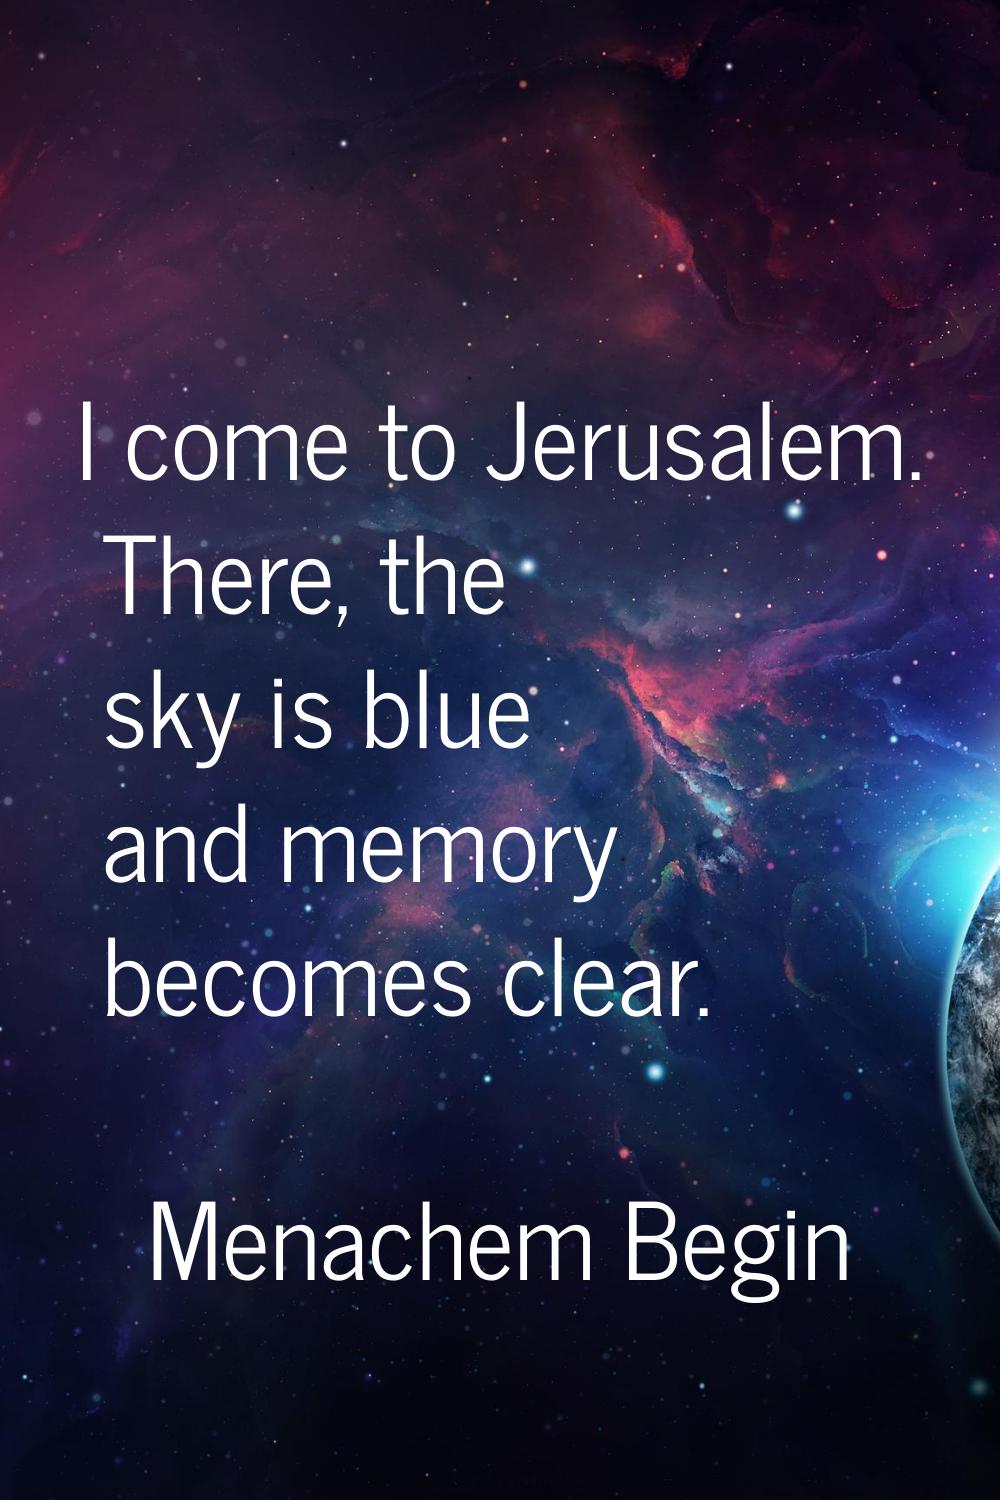 I come to Jerusalem. There, the sky is blue and memory becomes clear.